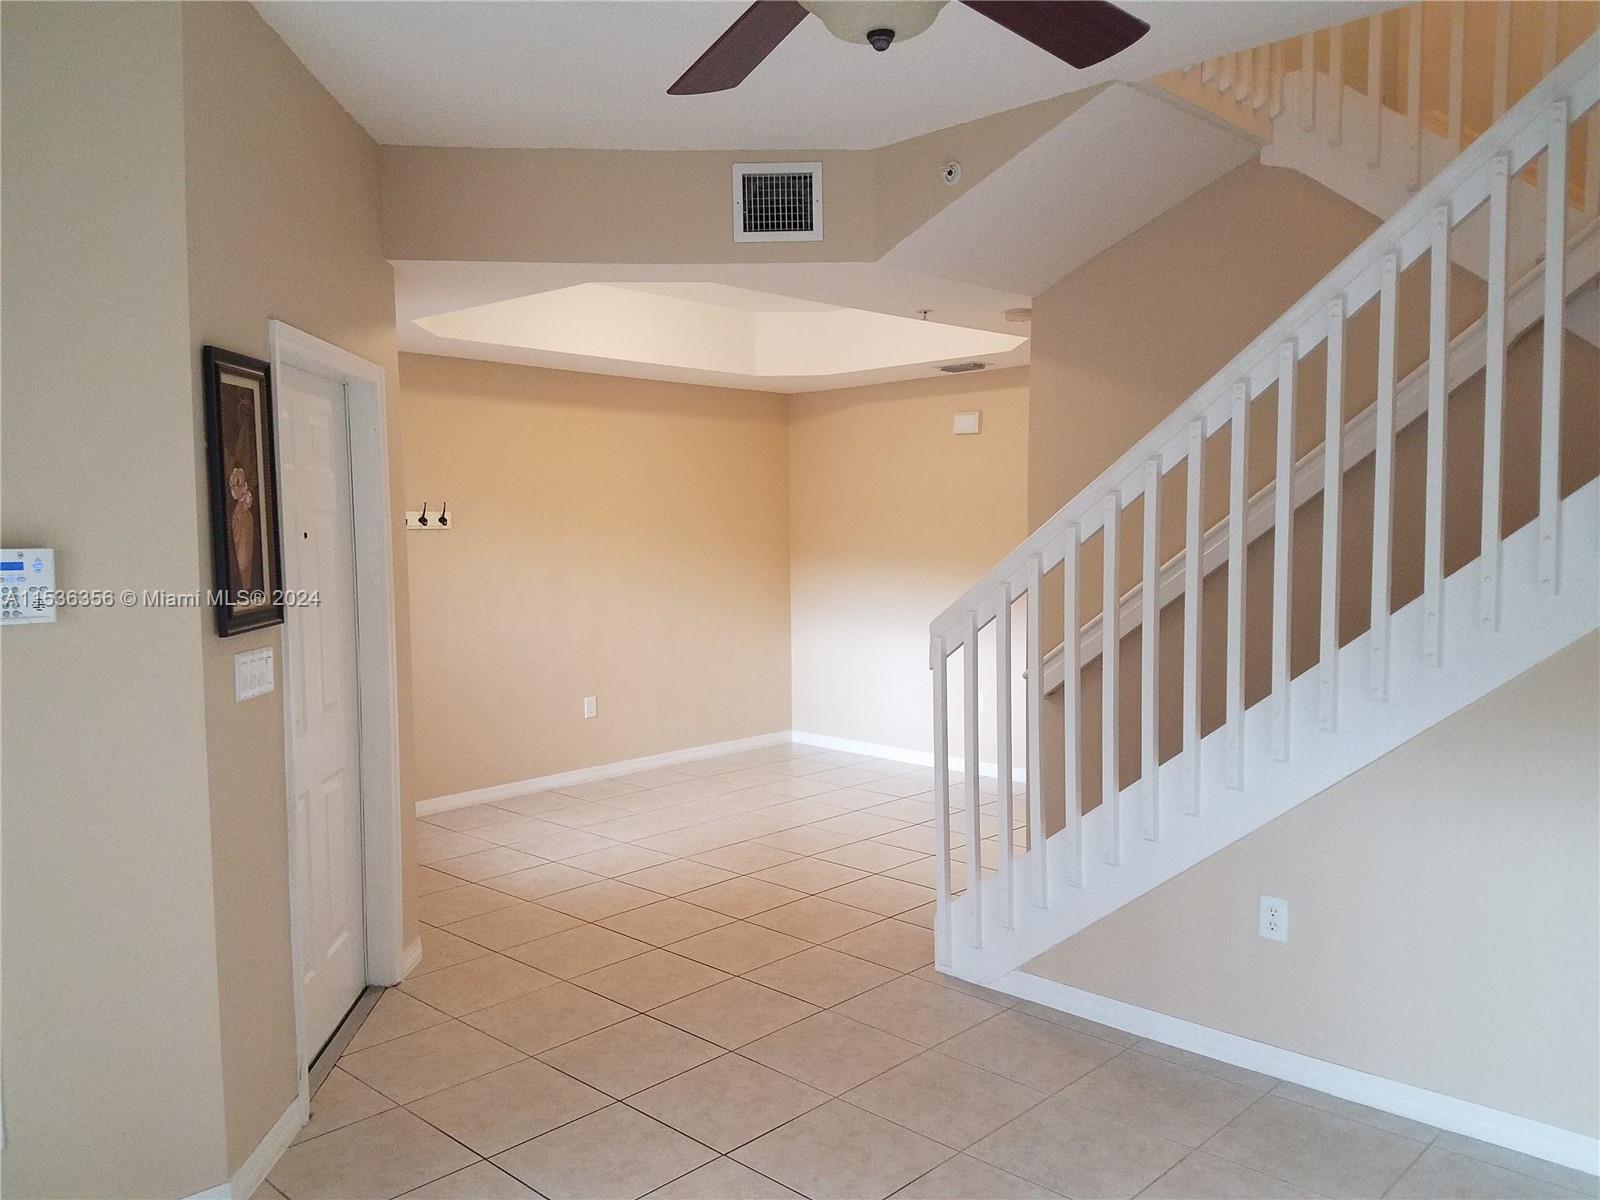 Photo 10 of 19 of listing 6001a37a-b9a7-4985-aaac-214273638c24 condo